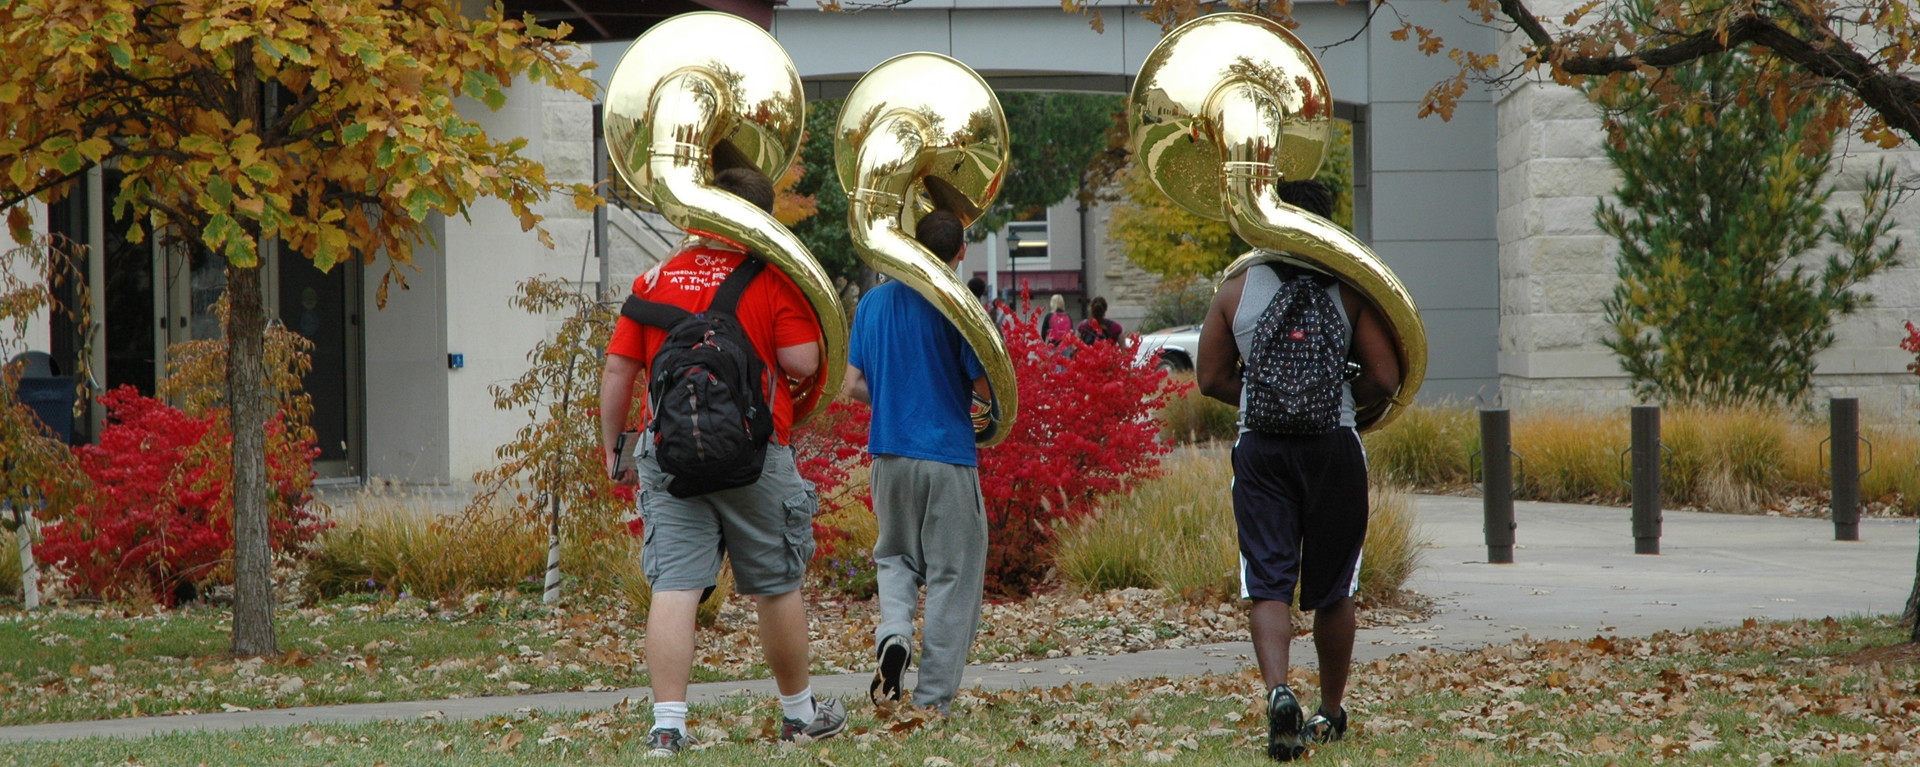 Students walking away from camera with marching band tubas